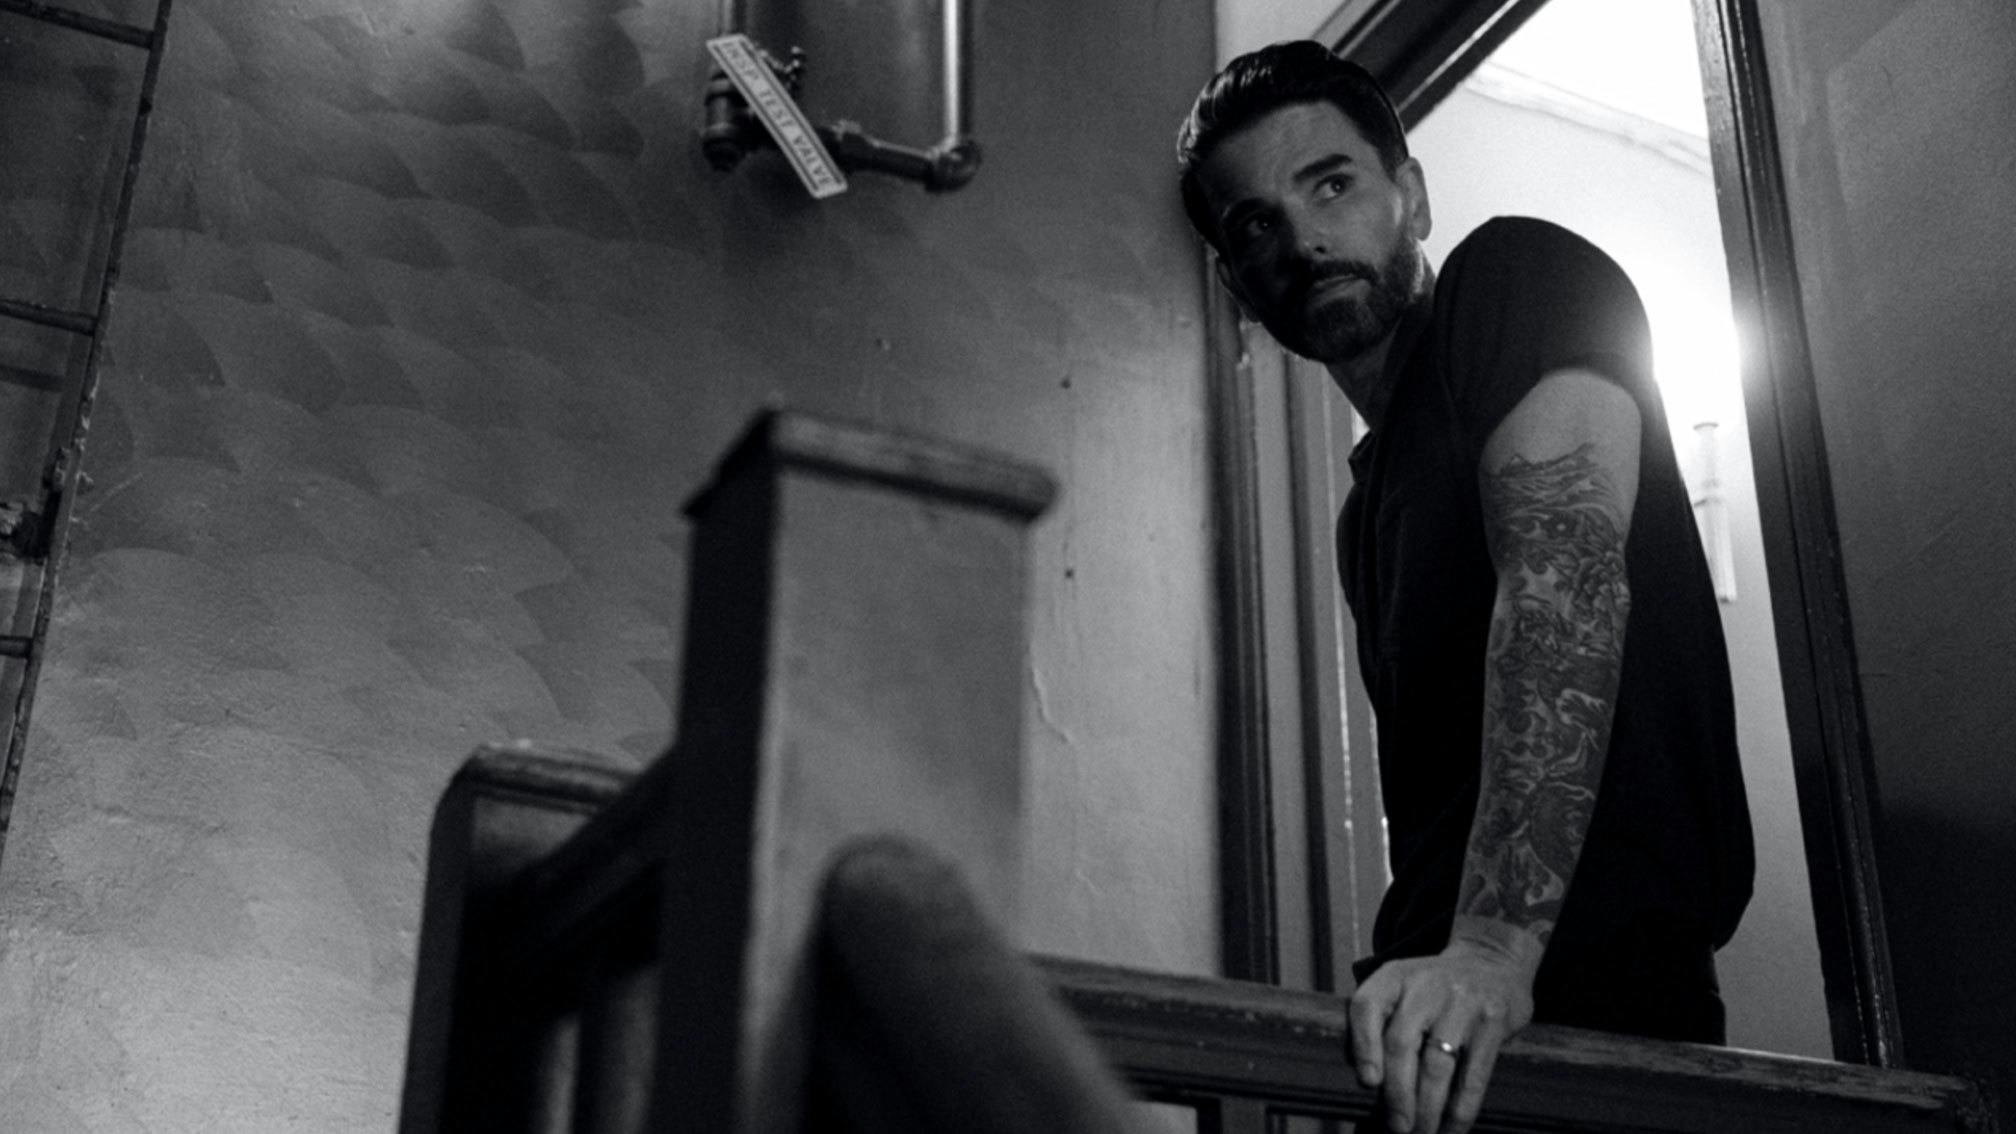 Chris Carrabba: My life in 10 songs